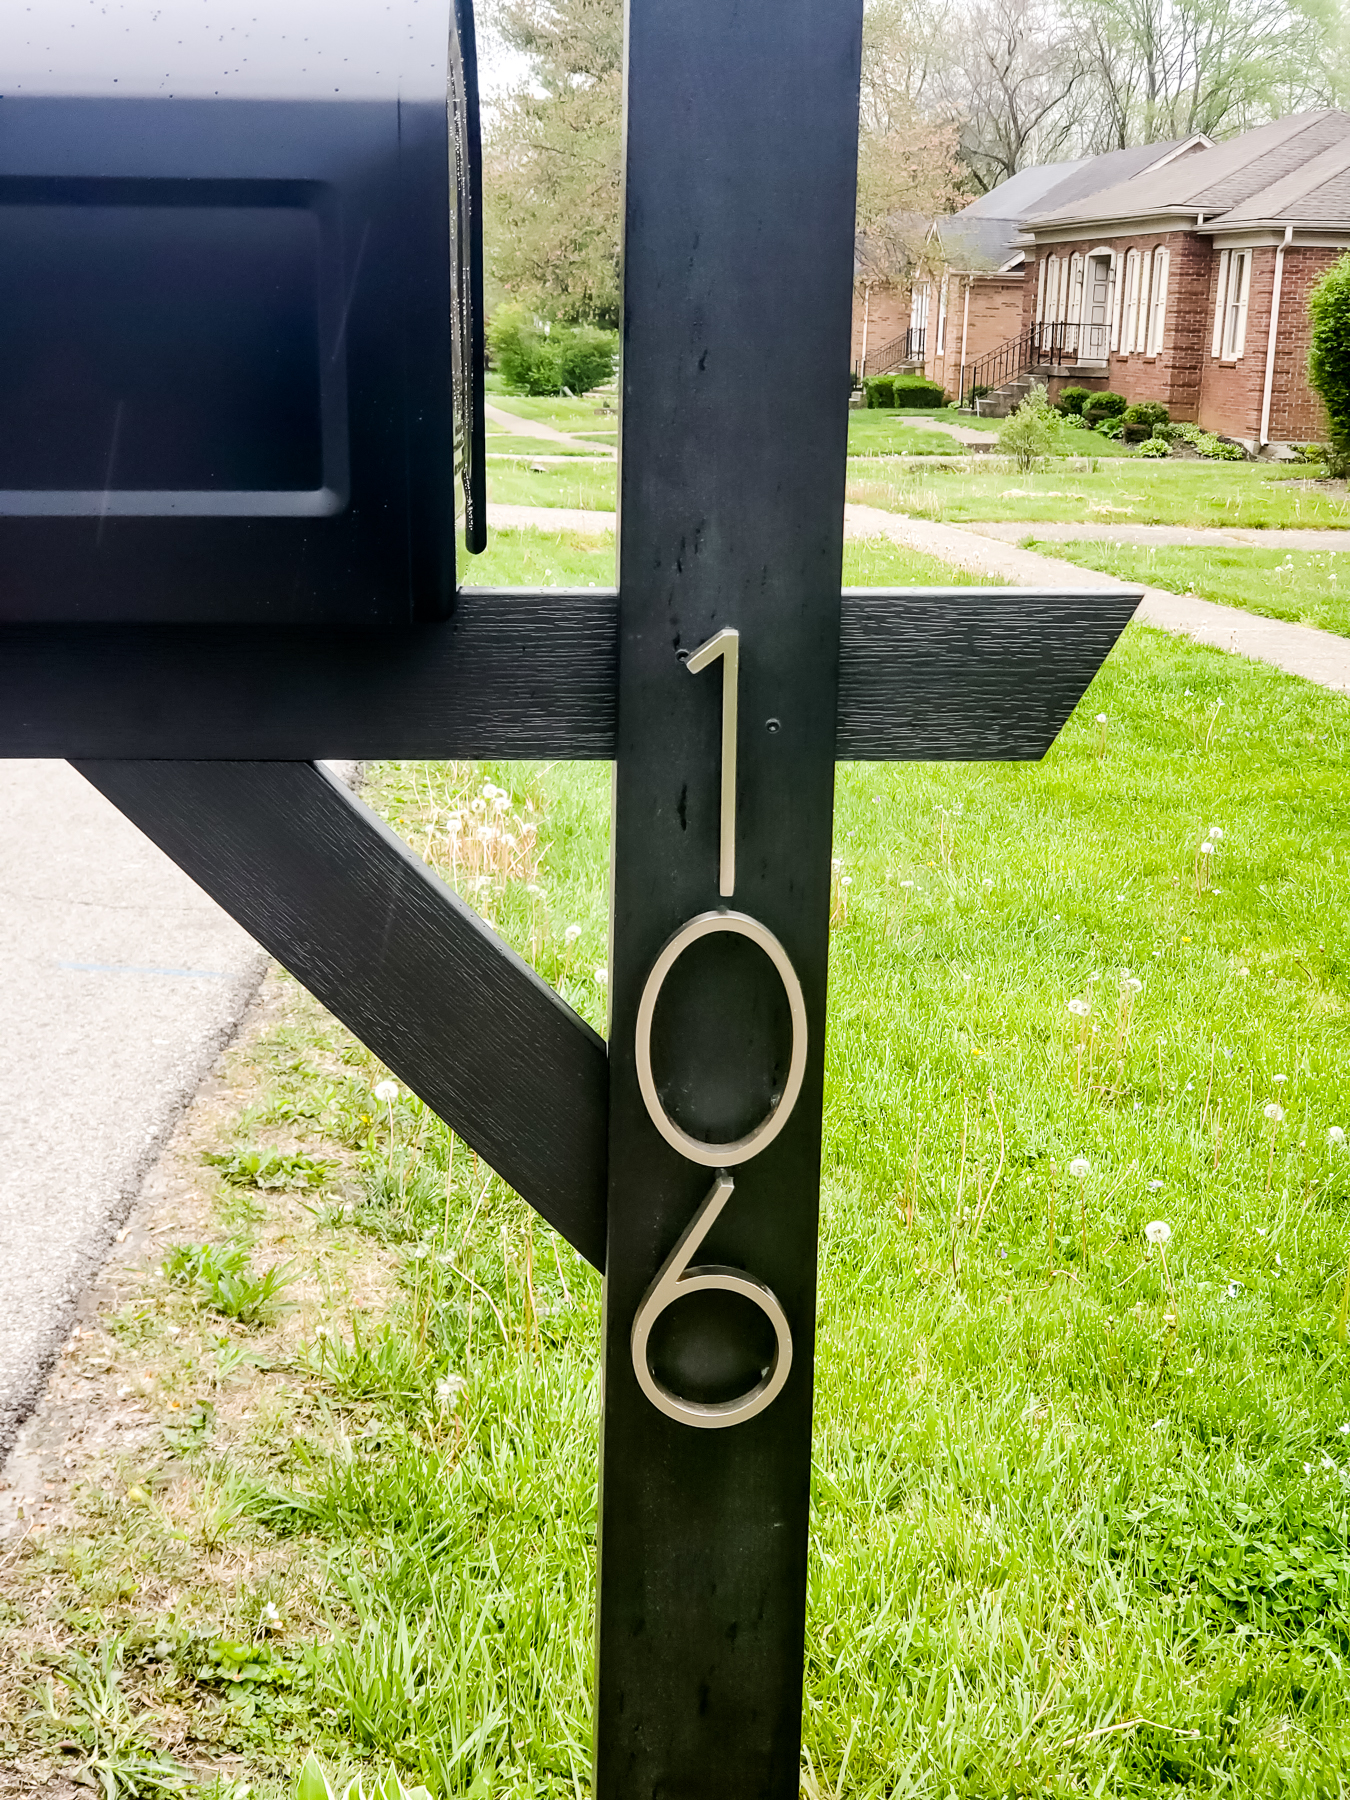 House Numbers on a Mailbox Post